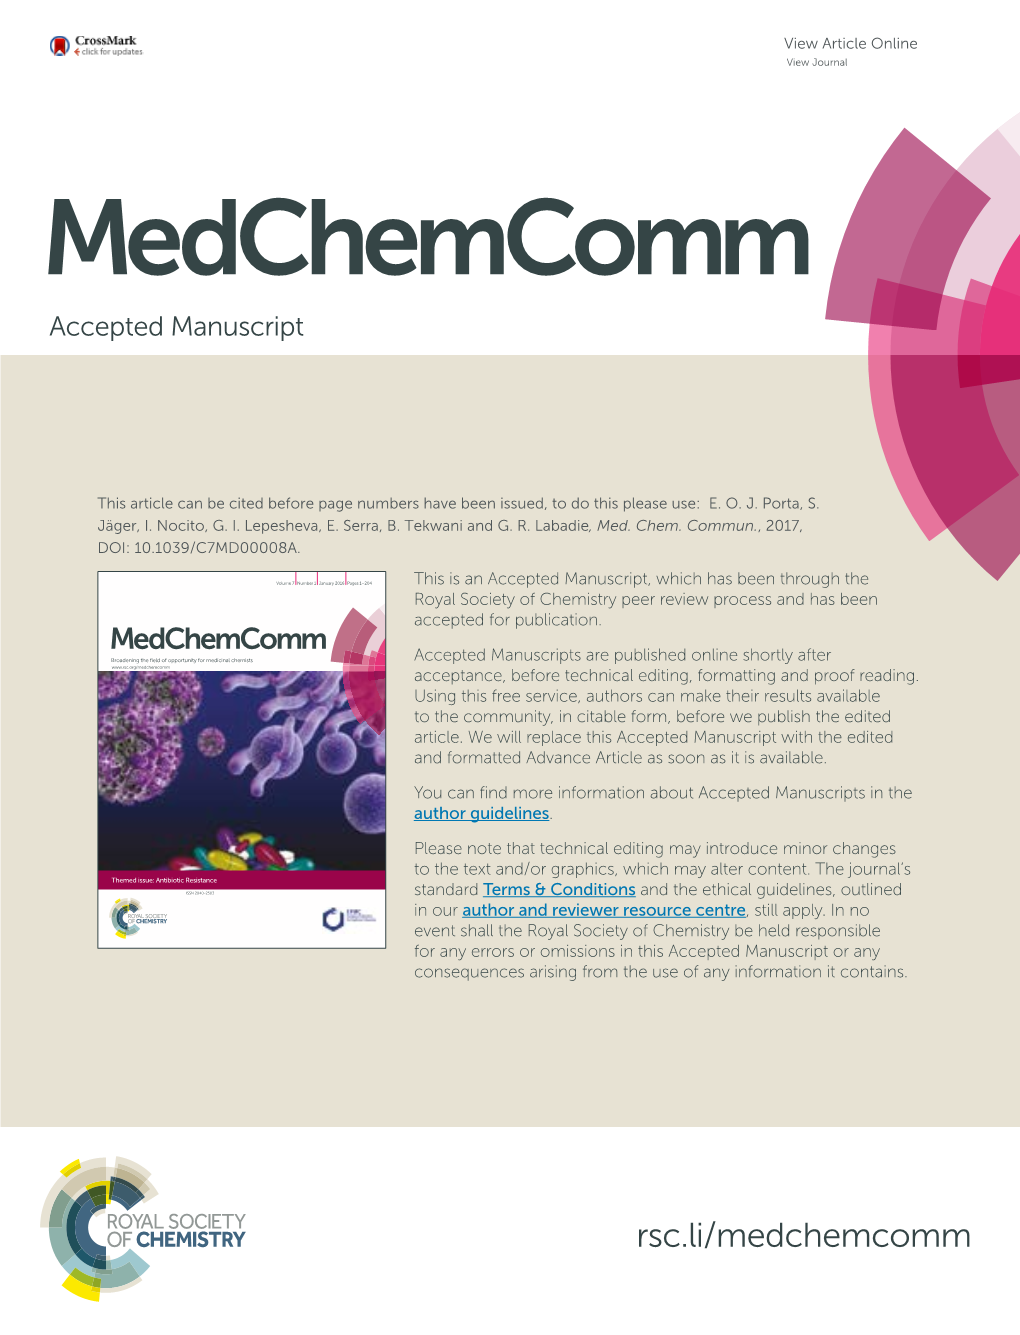 Medchemcomm Broadeningaccepted the Manuscript Field of Opportunity for Medicinal Chemists